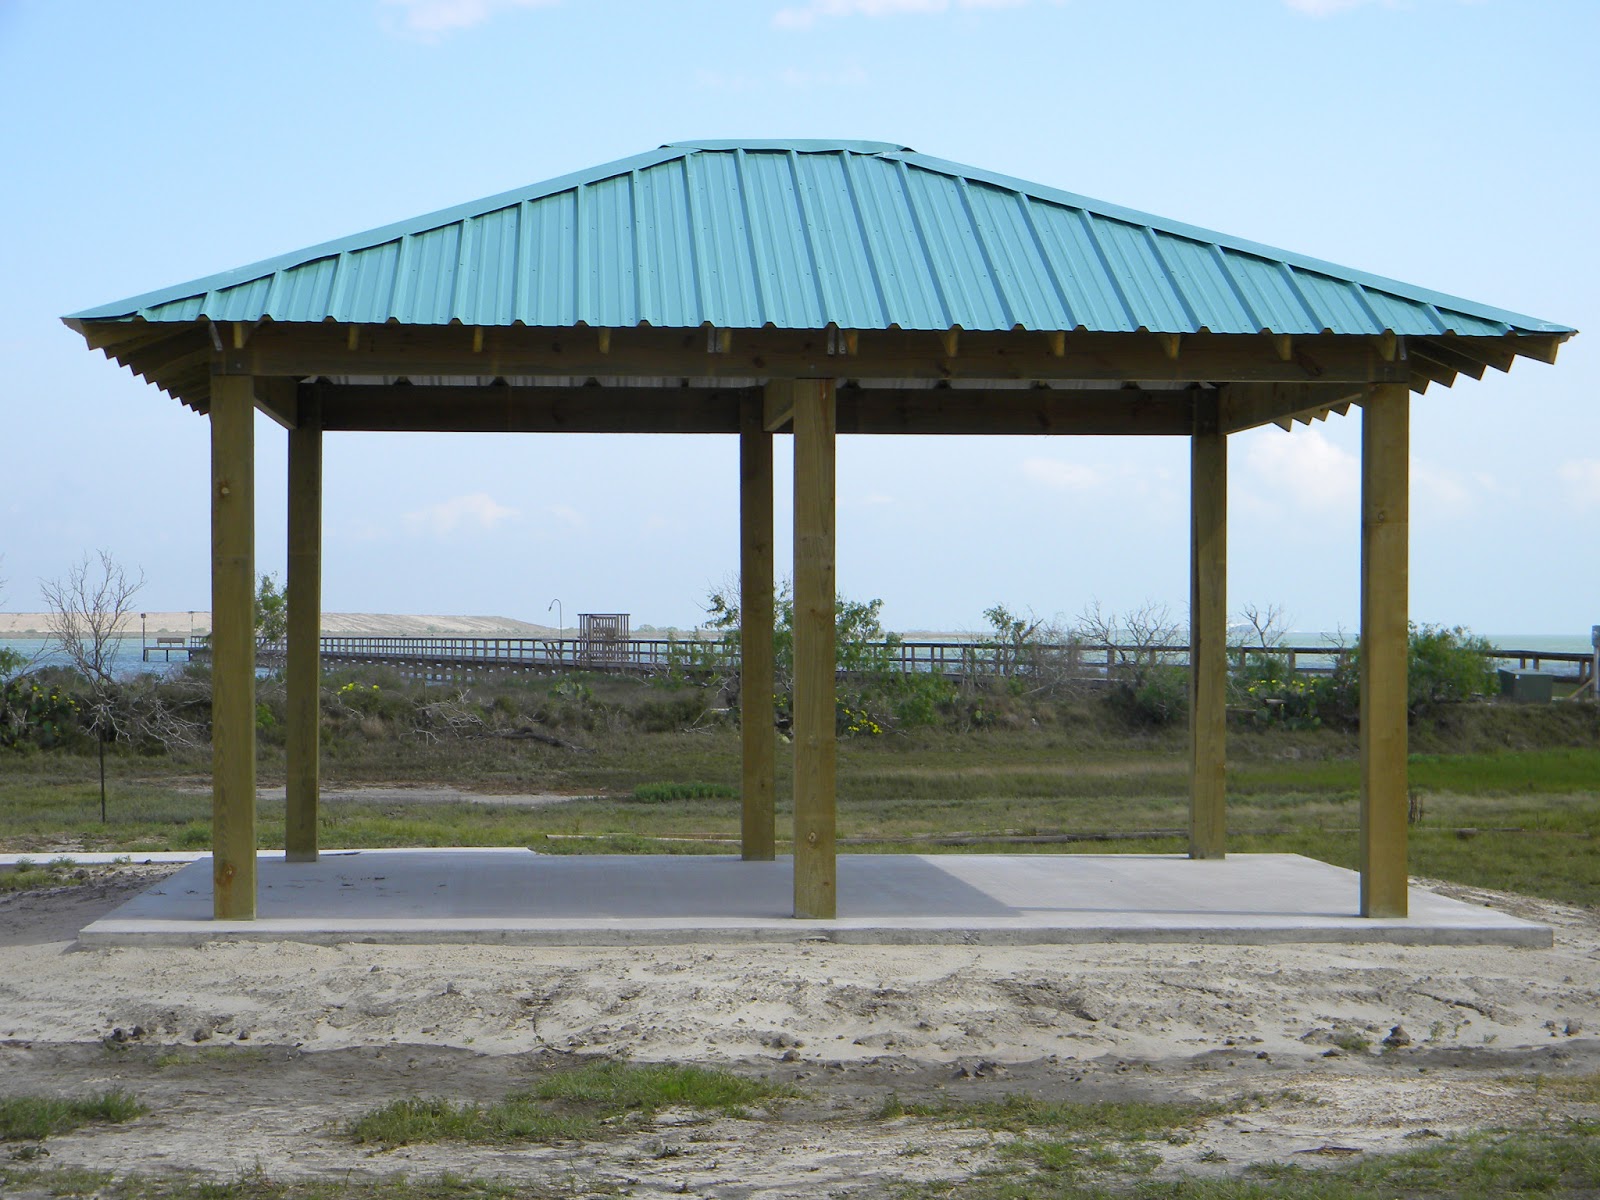 Sunset Bay Community: New Covered Picnic Shelter Completed in Common Area